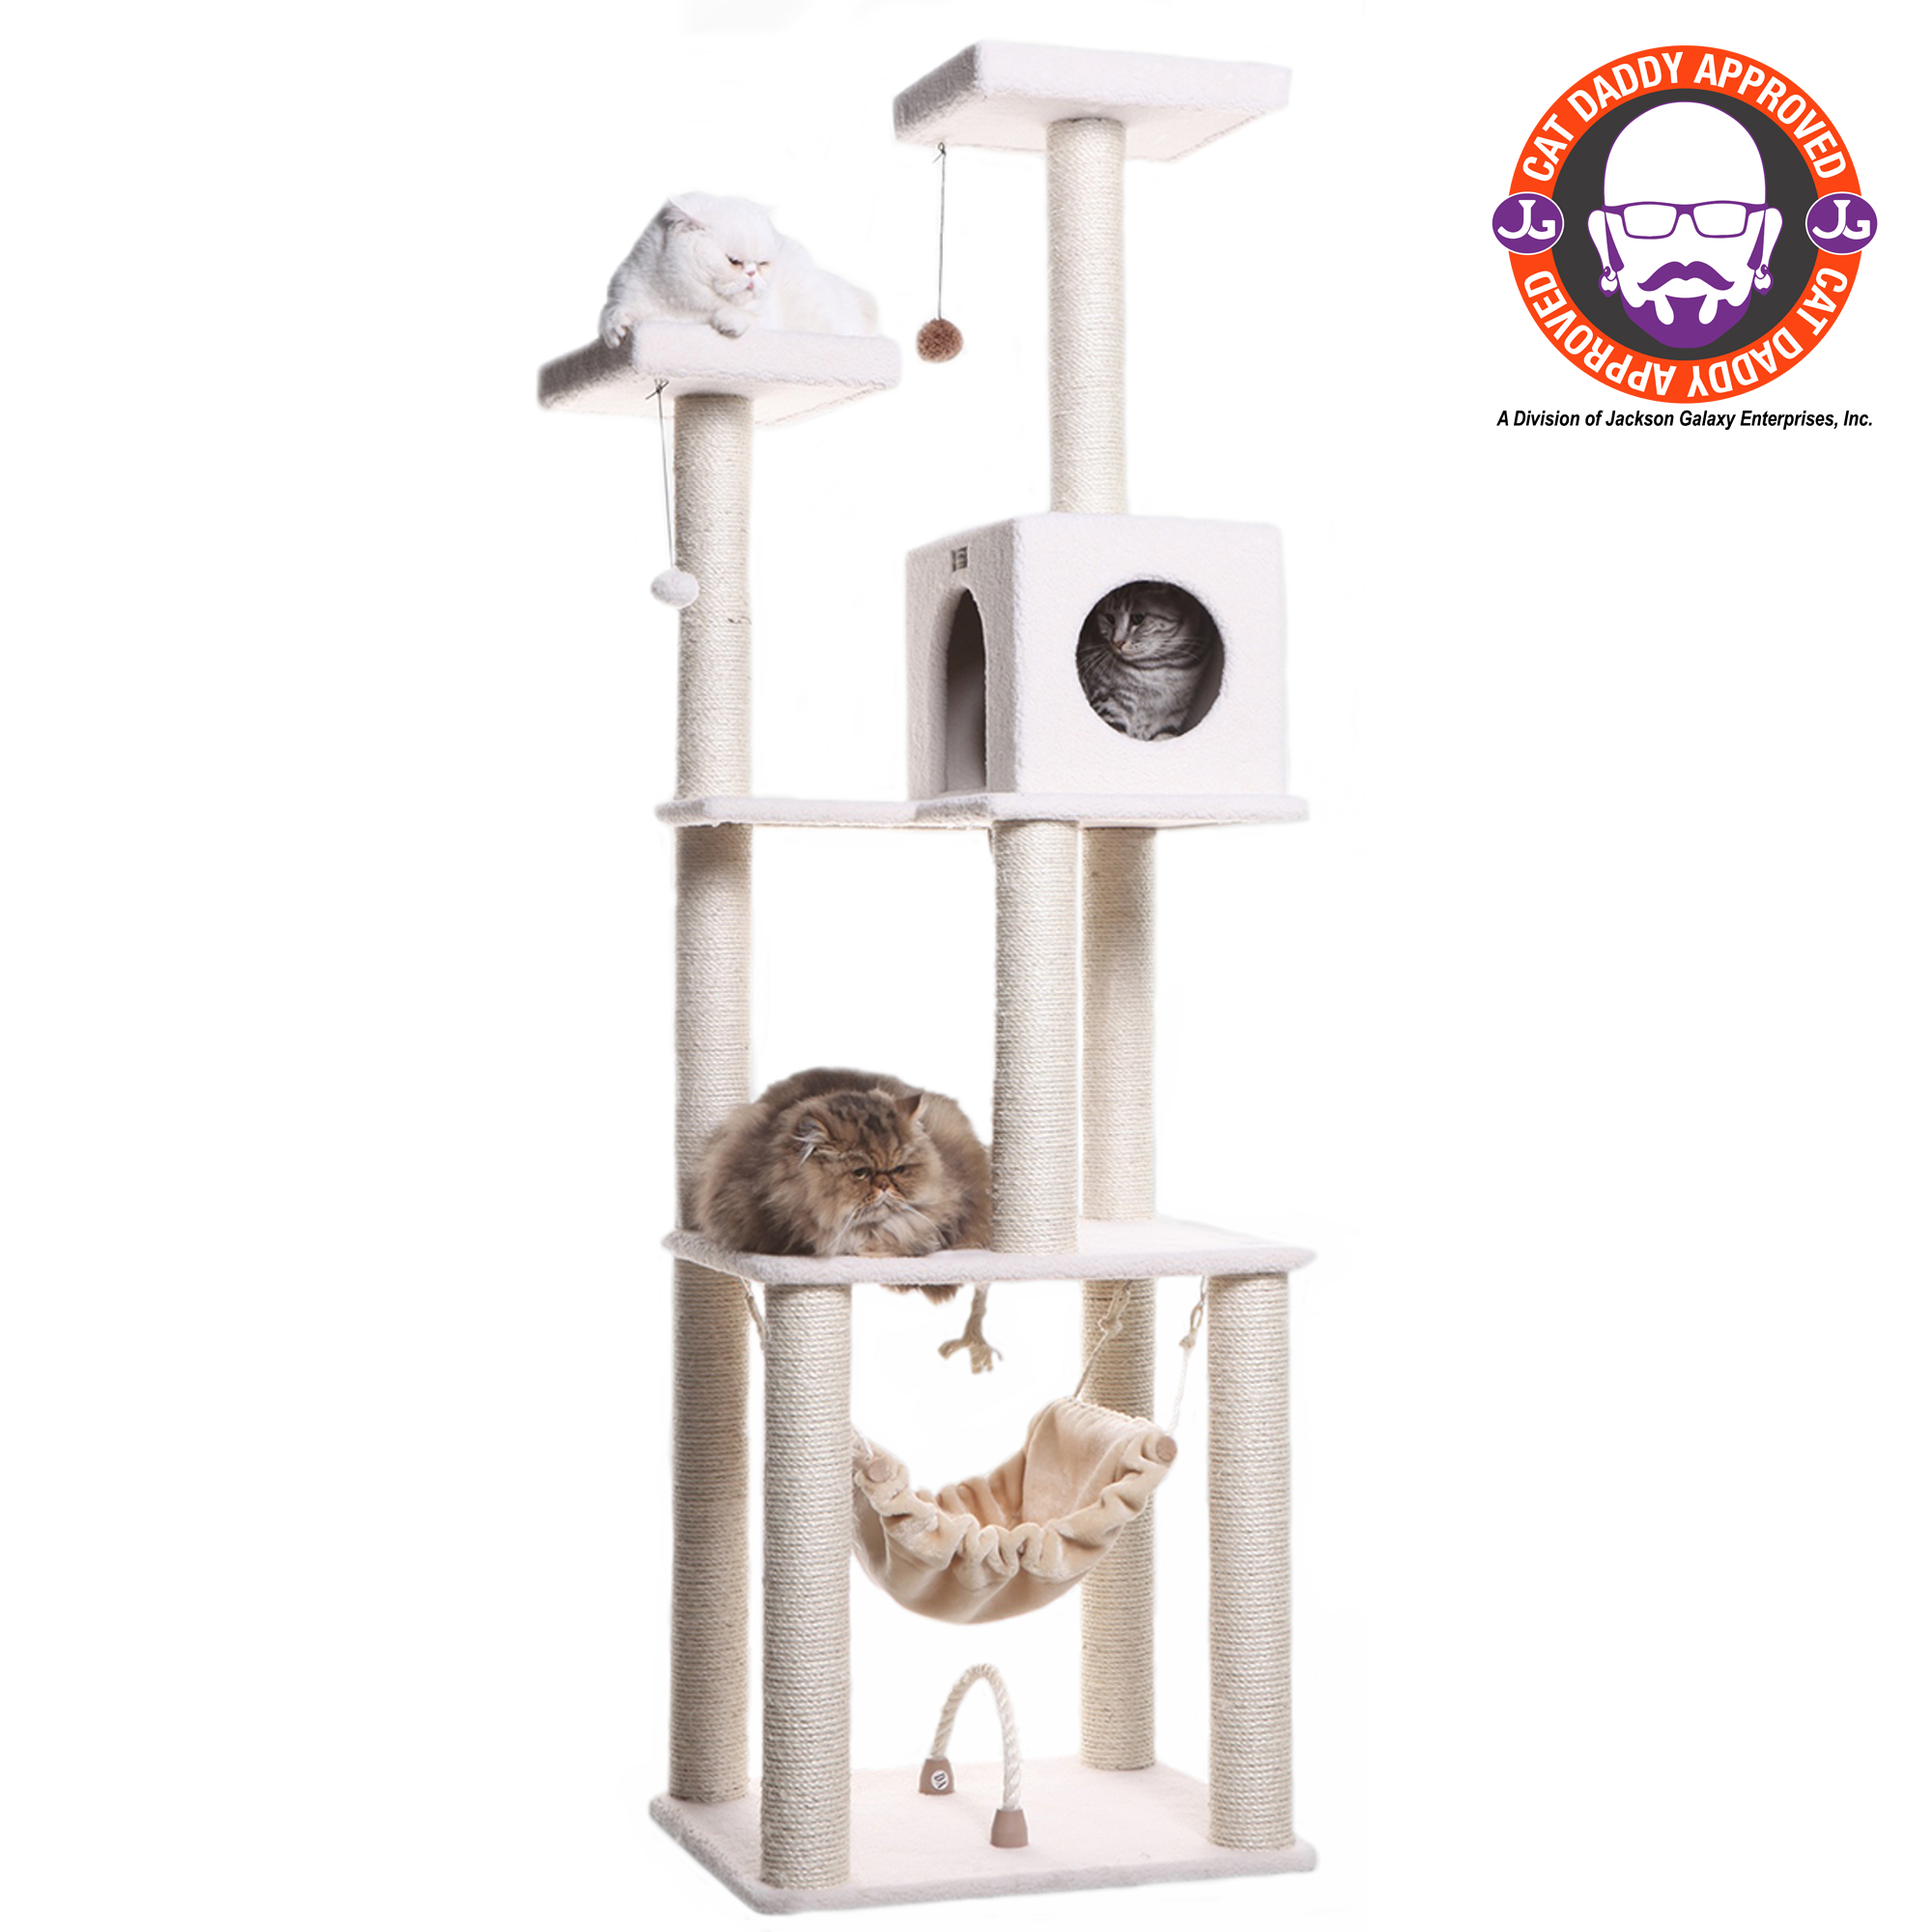 Picture of Armarkat B7301 Classic Real Wood Cat Tree In Ivory  Jackson Galaxy Approved  Four Levels With Rope SwIng  Hammock  Condo  and Perch